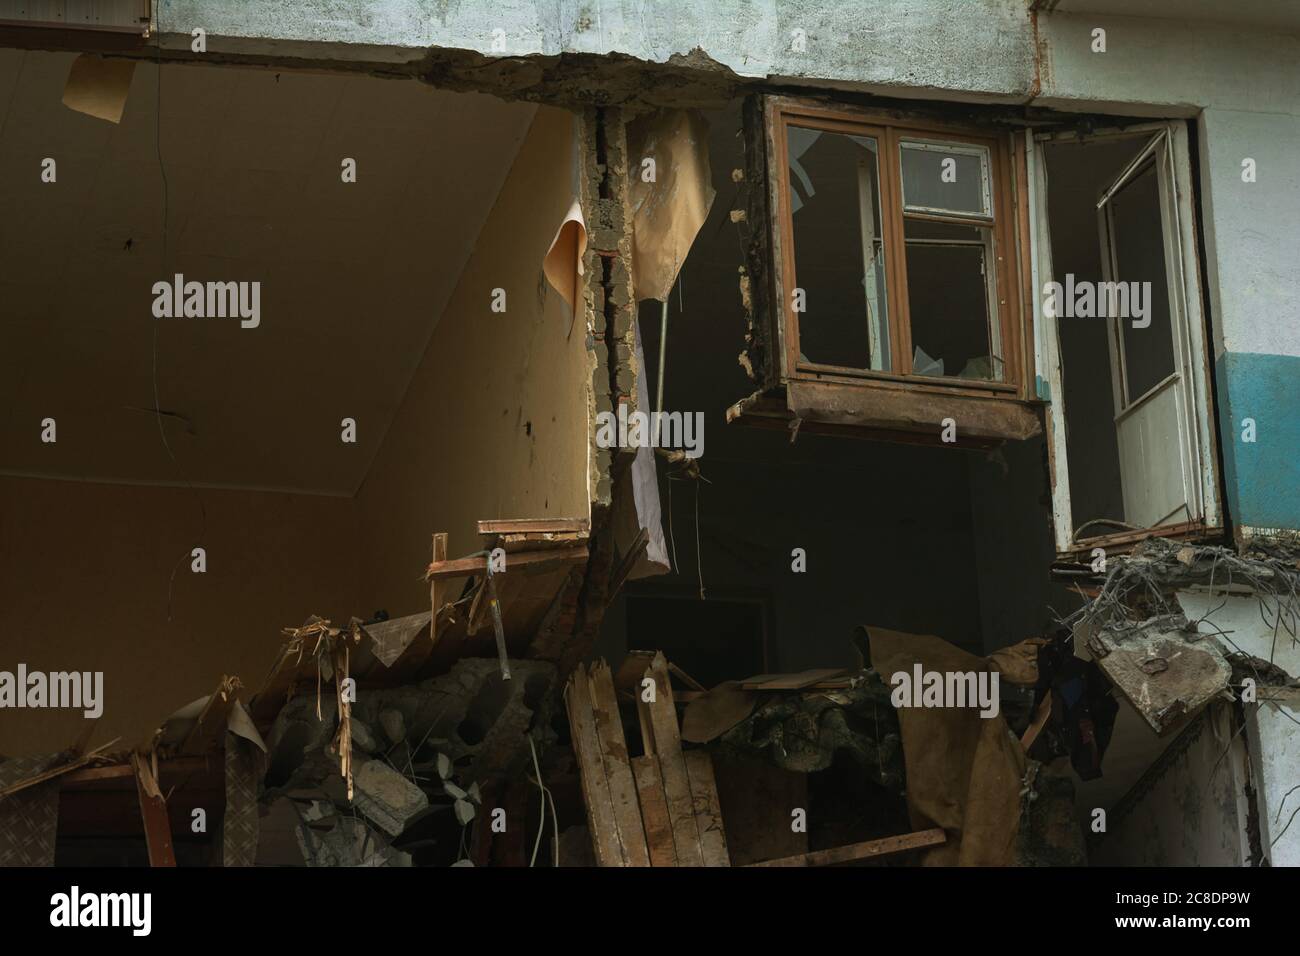 Demolition of a building recognized as emergency housing Stock Photo